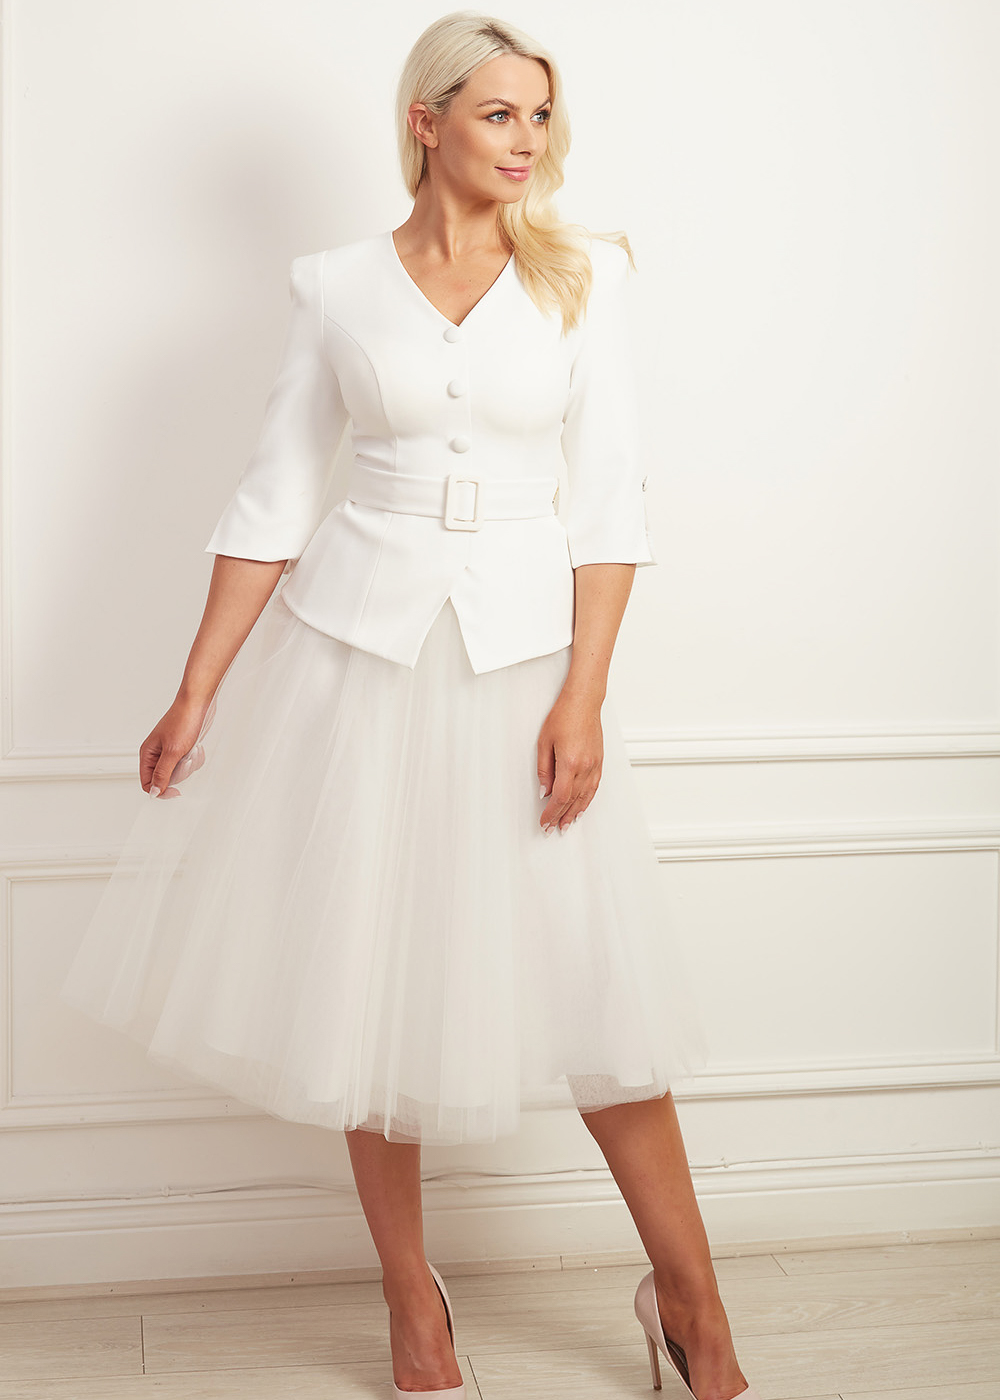 Ivory peplum belted top with v-neck and button detail with matching tulle a-line tutu